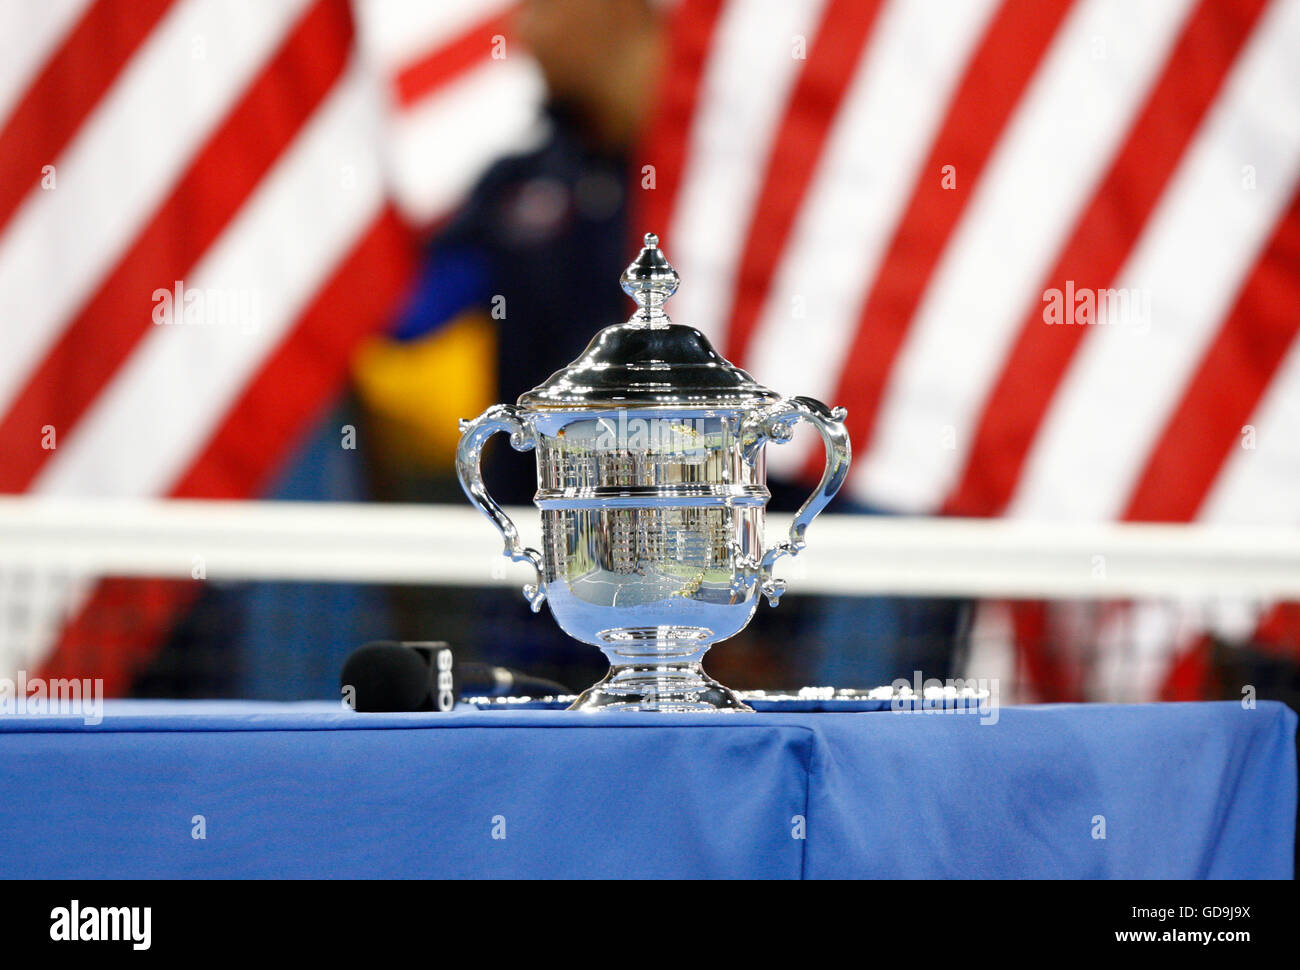 Women's finals, award ceremony, cup on a table in front of the U.S. flag, U.S. Open 2010, ITF Grand Slam Tennis Tournament, USTA Stock Photo